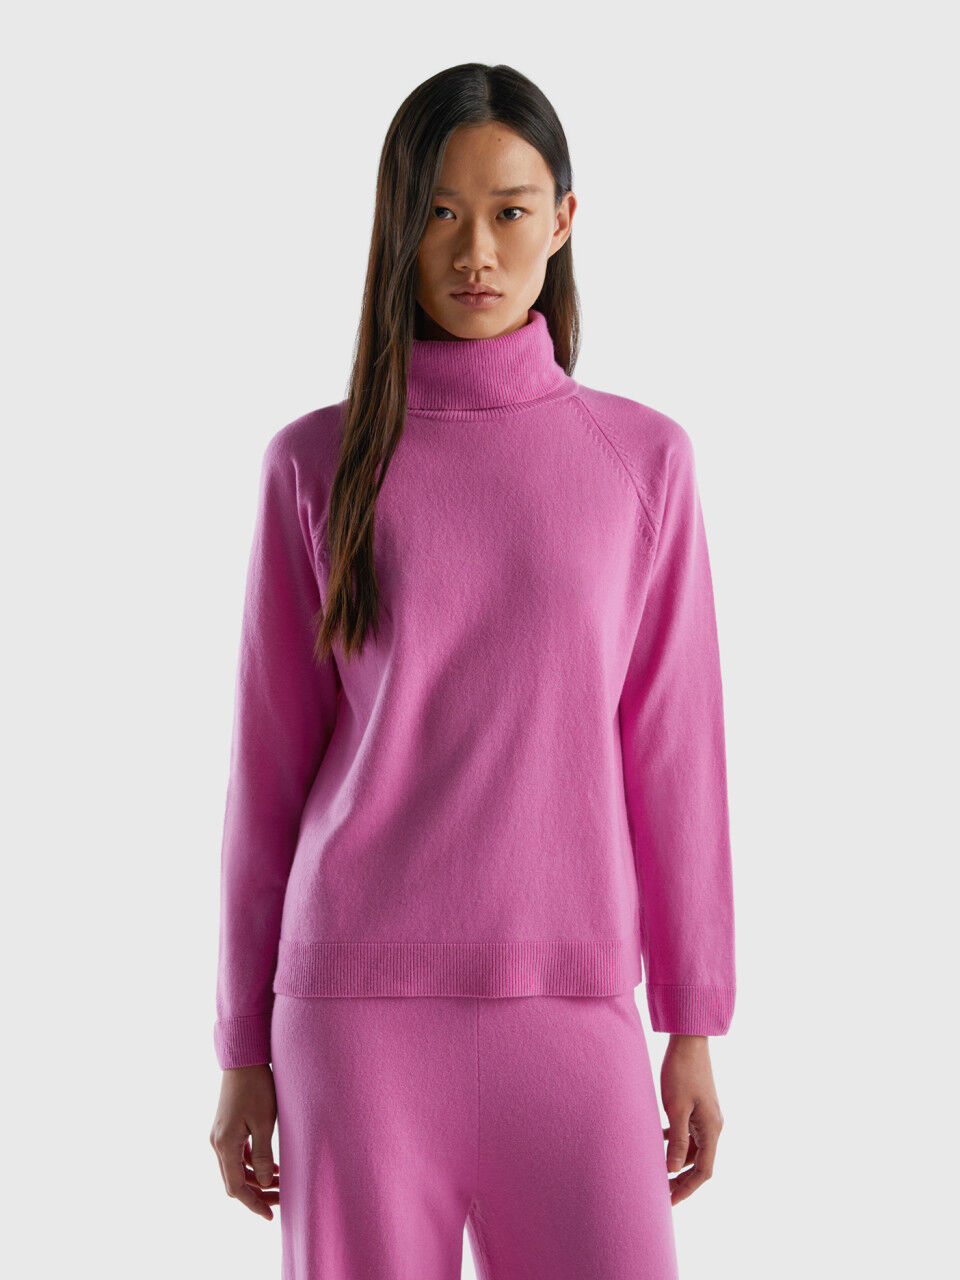 Pink turtleneck in wool and cashmere blend